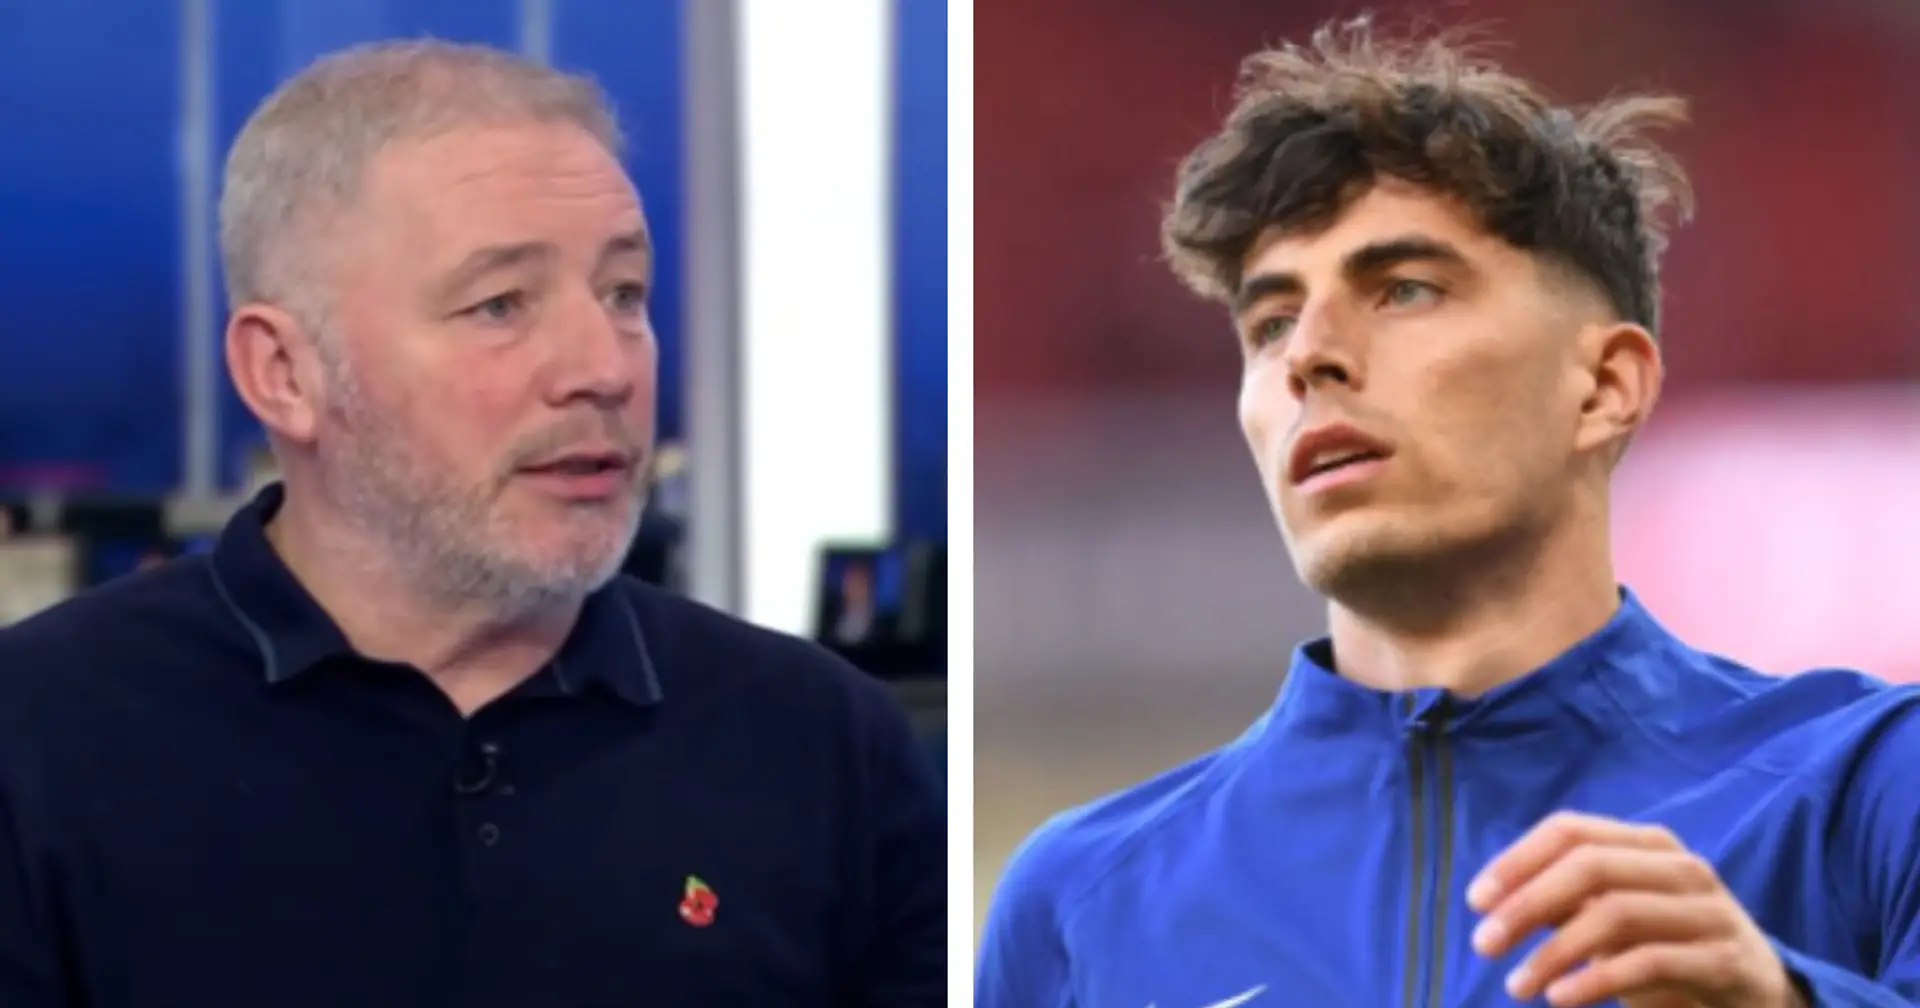 'It doesn't surprise me that Arsenal are in for him': Ally McCoist backs 'top player' Kai Havertz to succeed